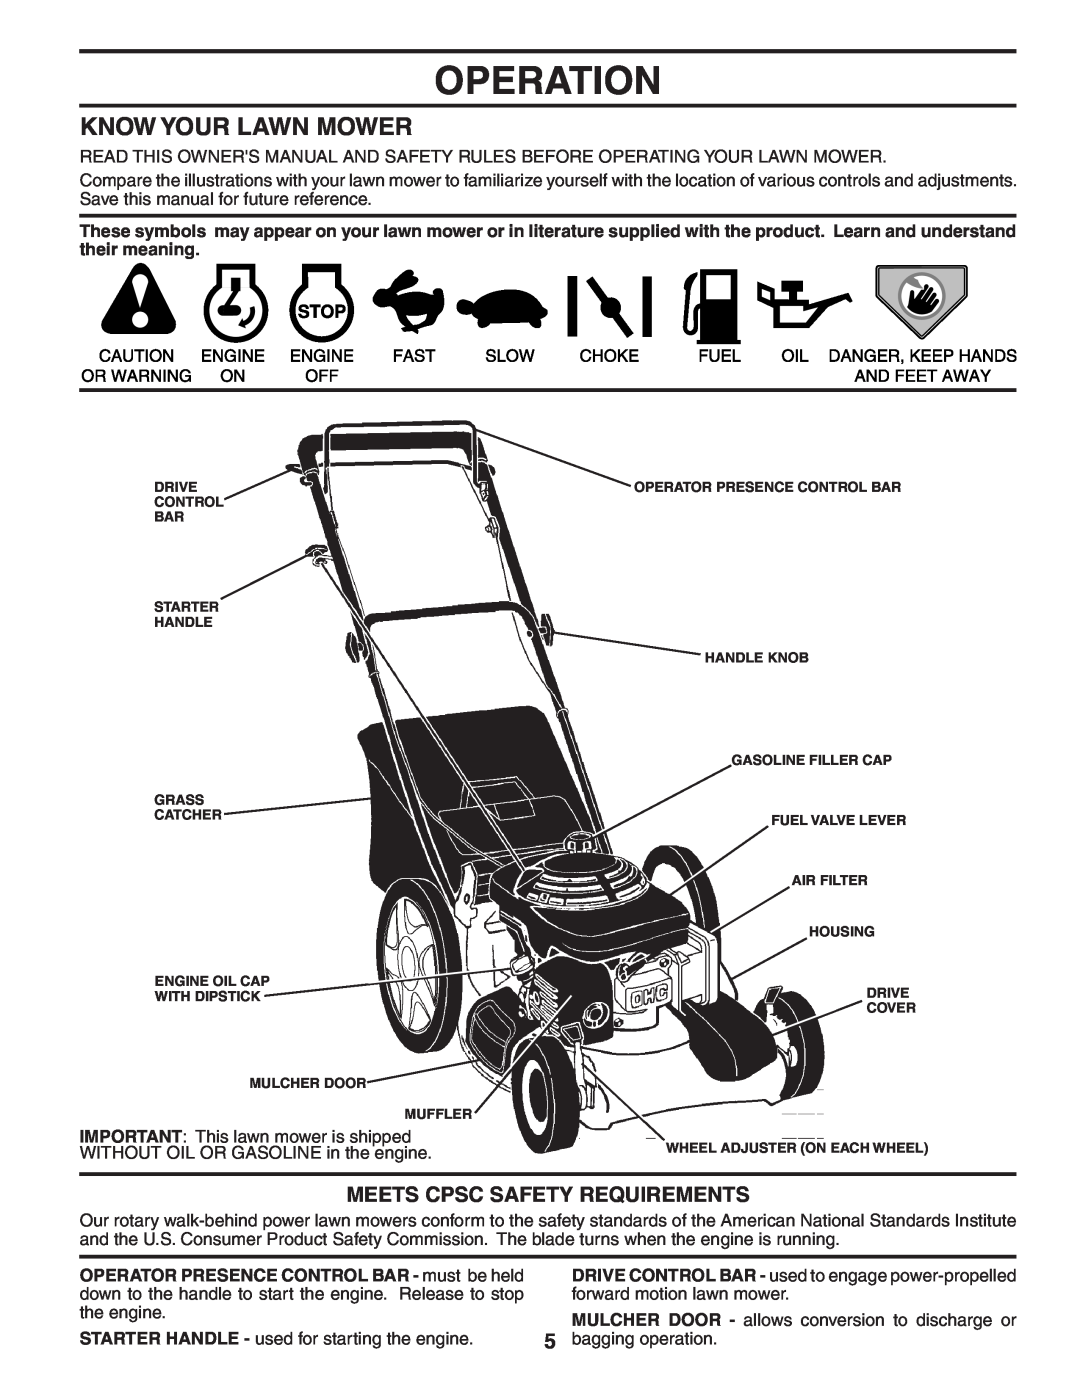 Husqvarna 5521CH owner manual Operation, Know Your Lawn Mower, Meets Cpsc Safety Requirements 